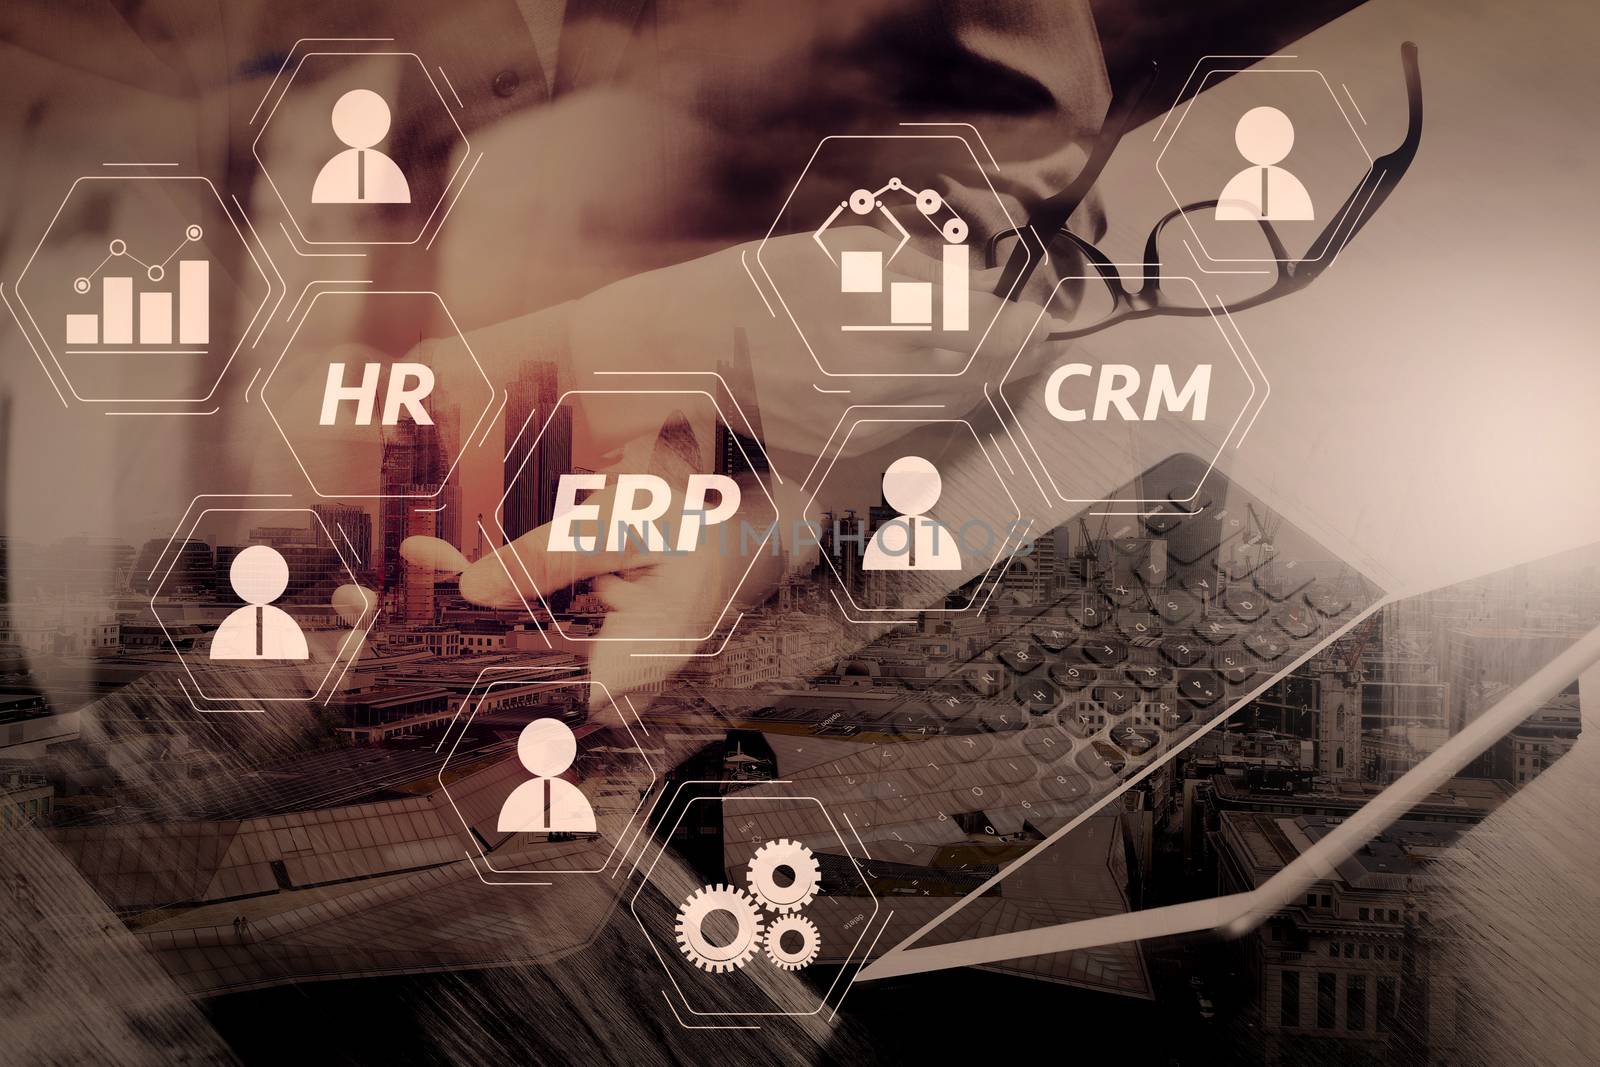 Architecture of ERP (Enterprise Resource Planning) system with connections between business intelligence (BI), production, CRM modules and HR diagram.businessman hand using smart phone,mobile payments online.